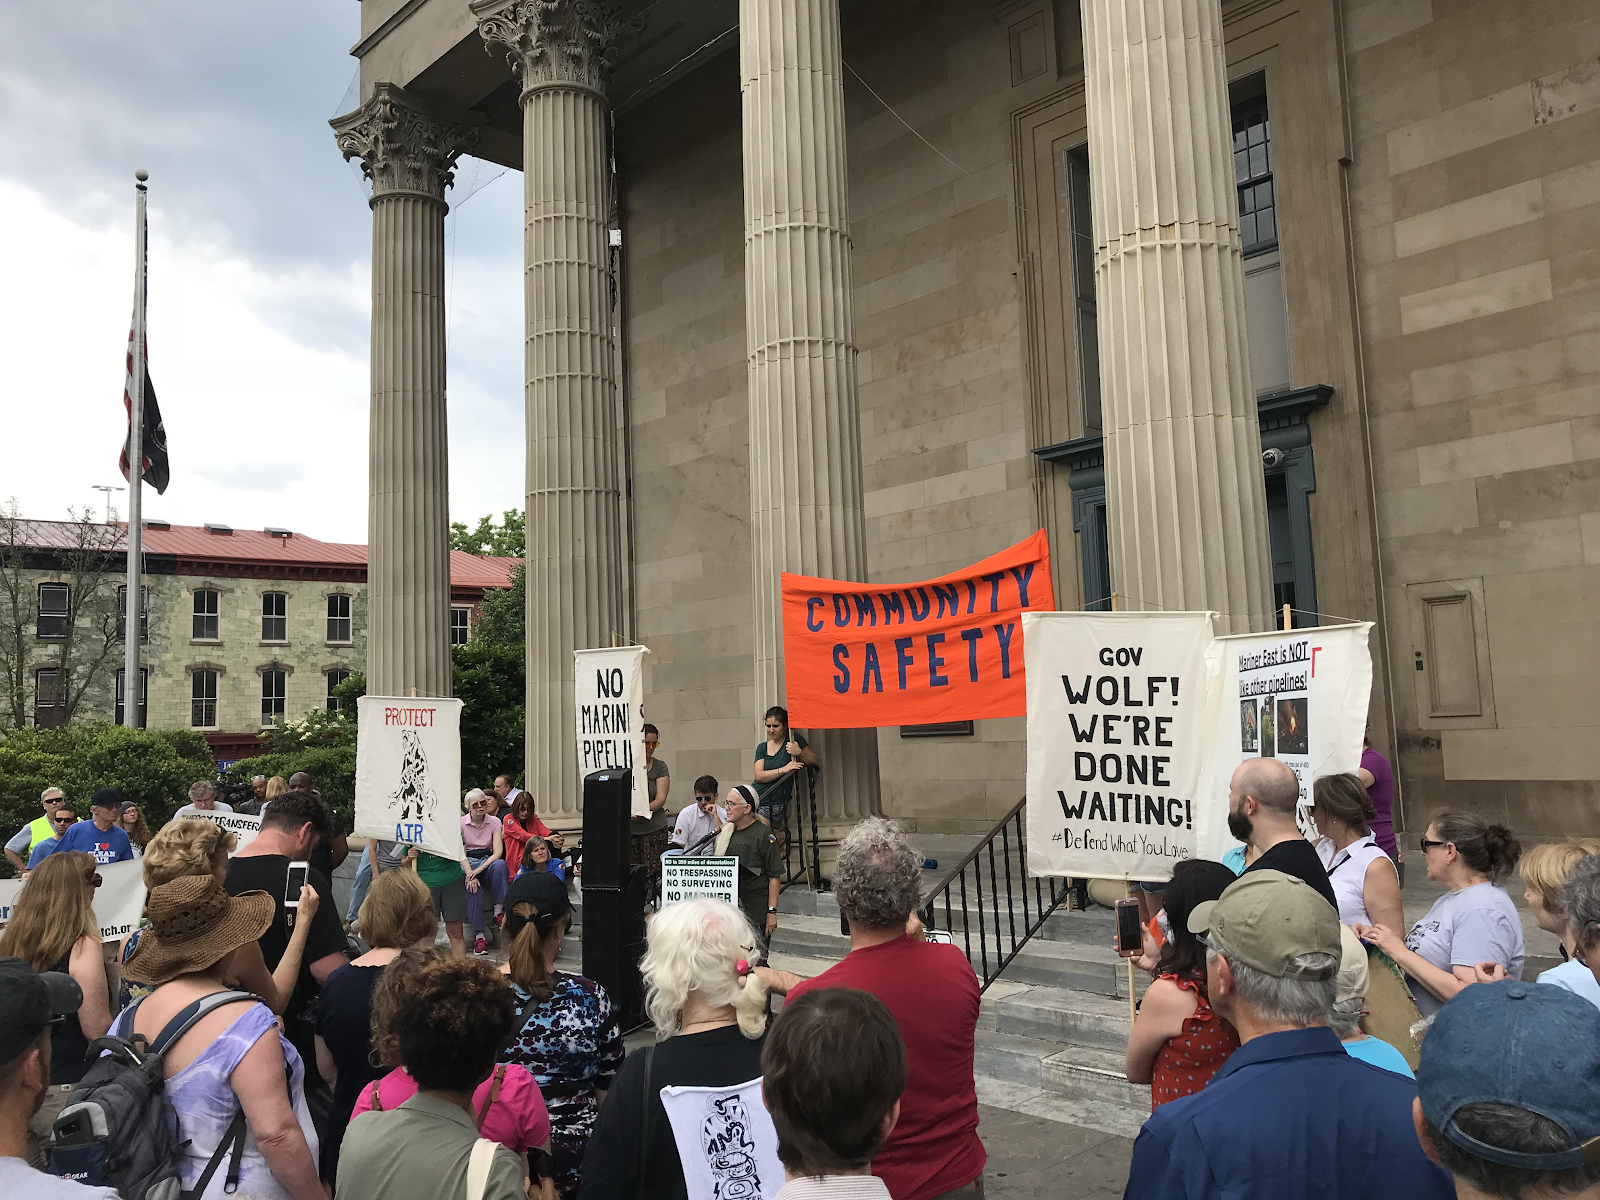 A group of residents gather on the steps of the West Chester Historic Courthouse to demand a halt to the Mariner East 2 Pipeline. An impacted landowner, Ellen Gerhart, is at the podium speaking to her experiences. People in the crowd hold signs that say "COMMUNITY SAFETY" and "Gov. Wolf! We're done waiting!"